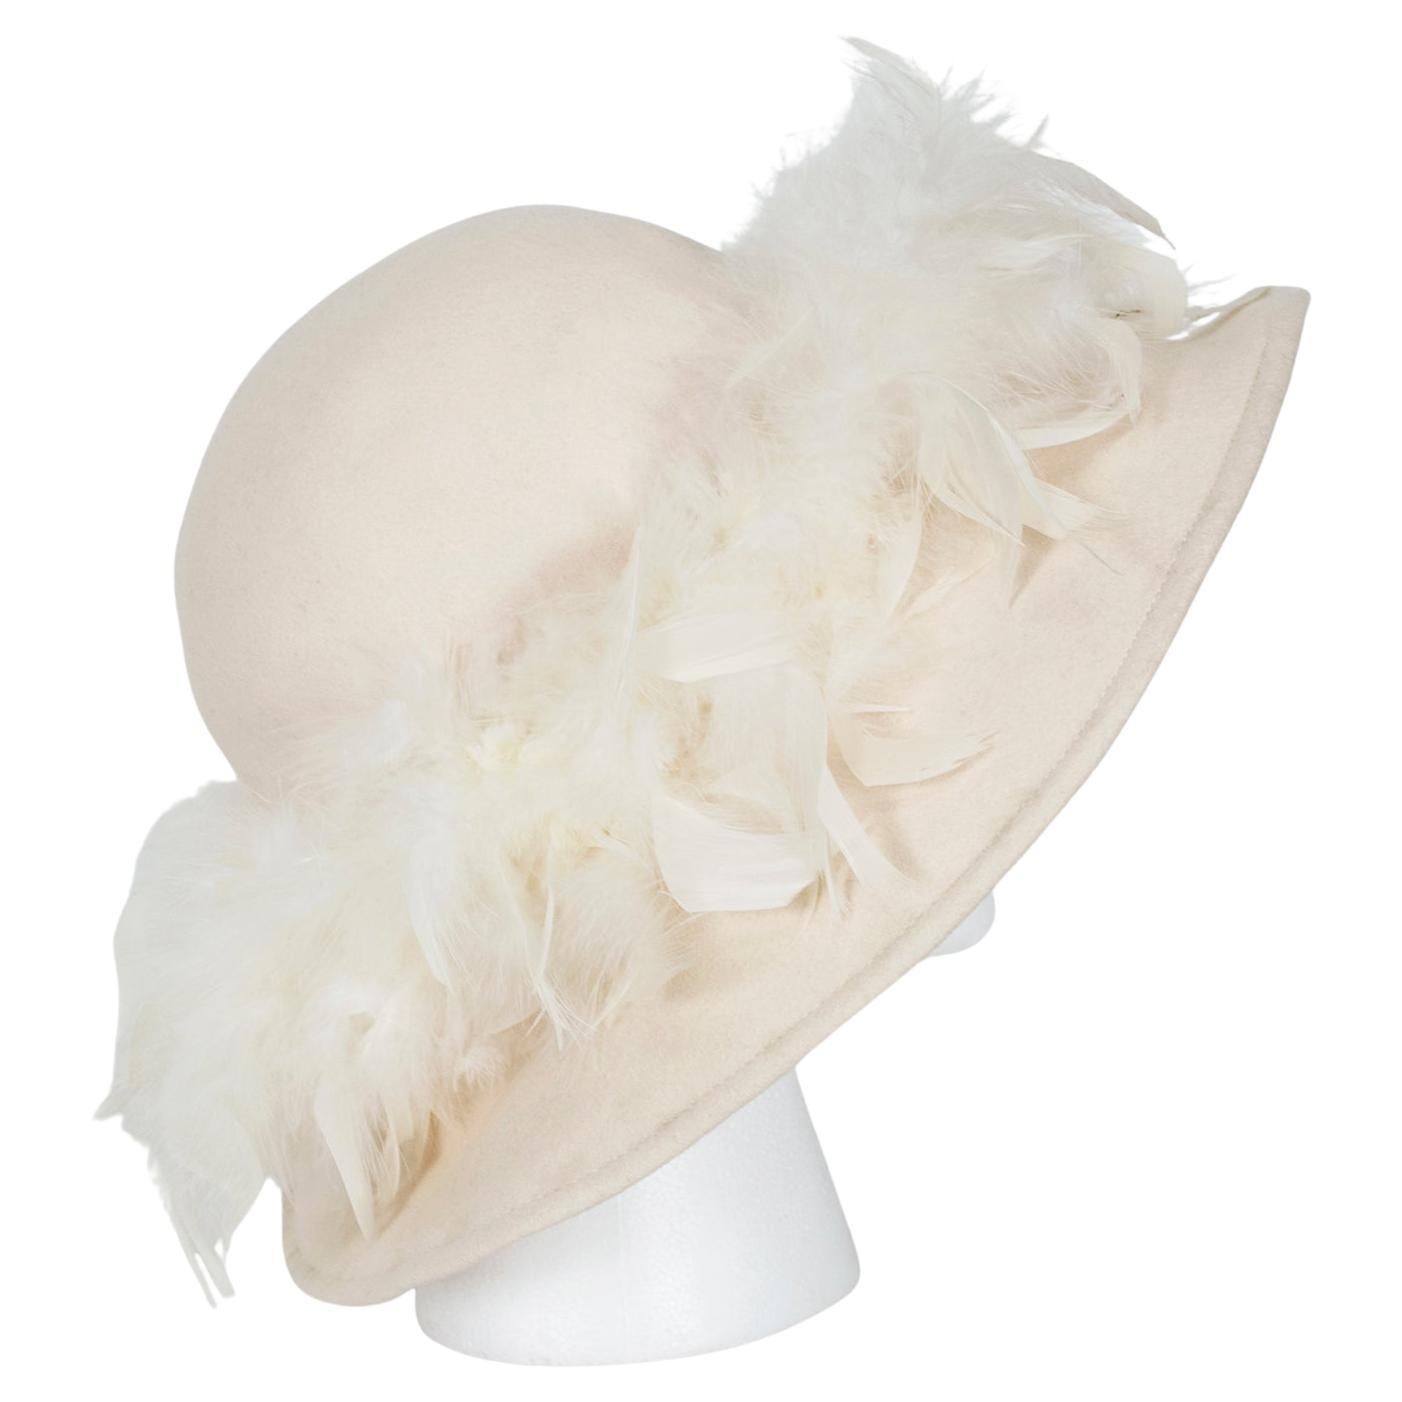 Bollman Co. Ivory Boho Greenwich Floppy Hat with Ostrich Feather Band – M, 1970s